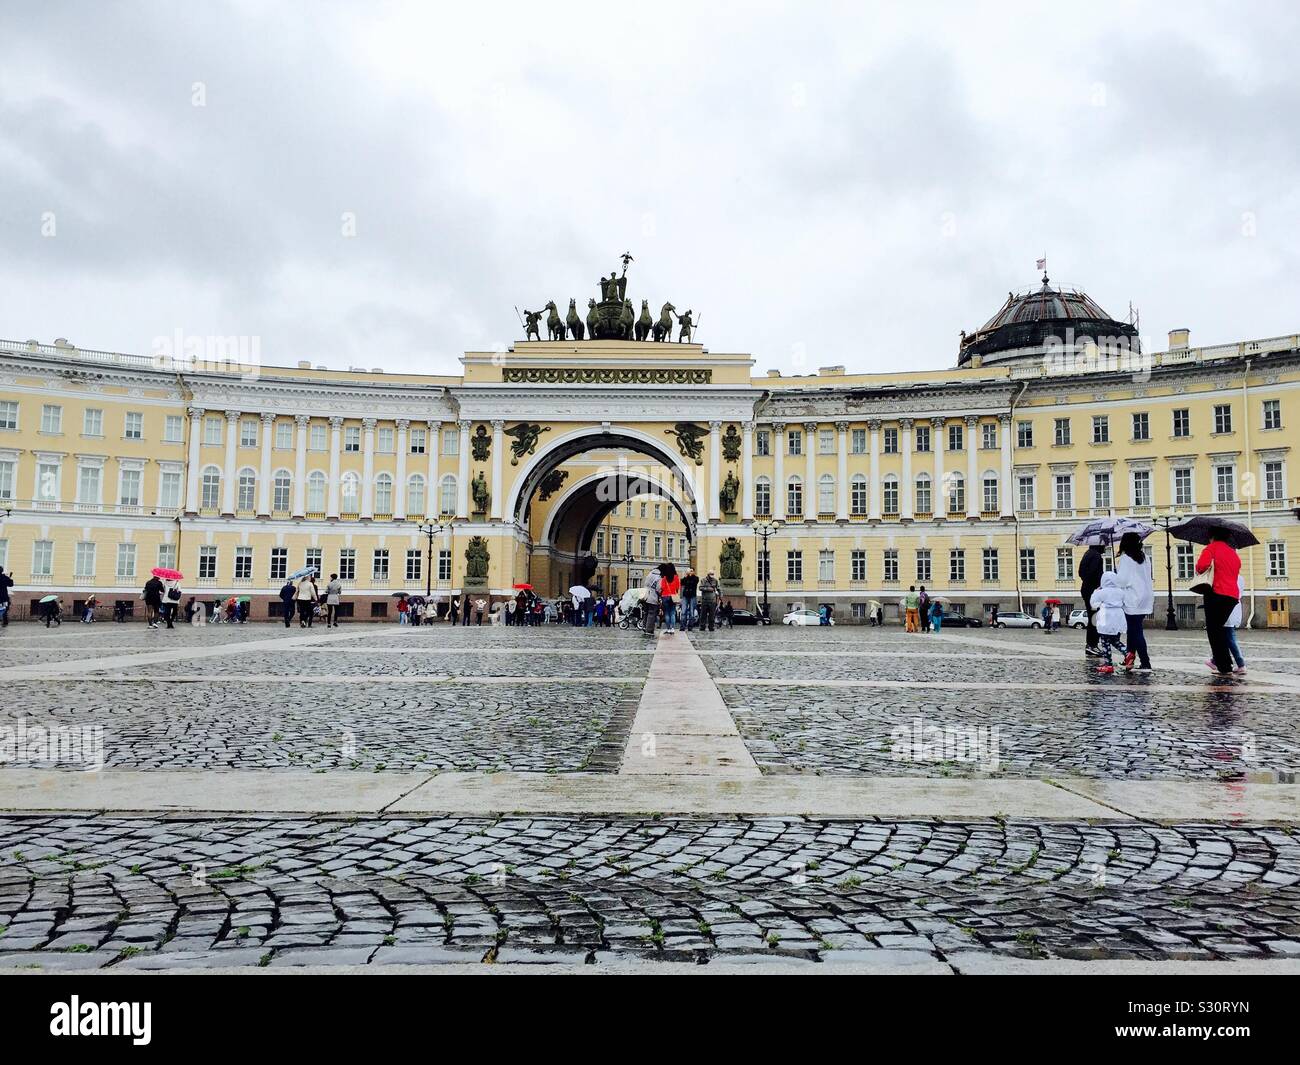 Low perspective view across St. Petersburg’s cobbled stoned Palace Square to the General Staff Building on rainy day. Famous Russian architectural landmark, General Staff Building. Stock Photo